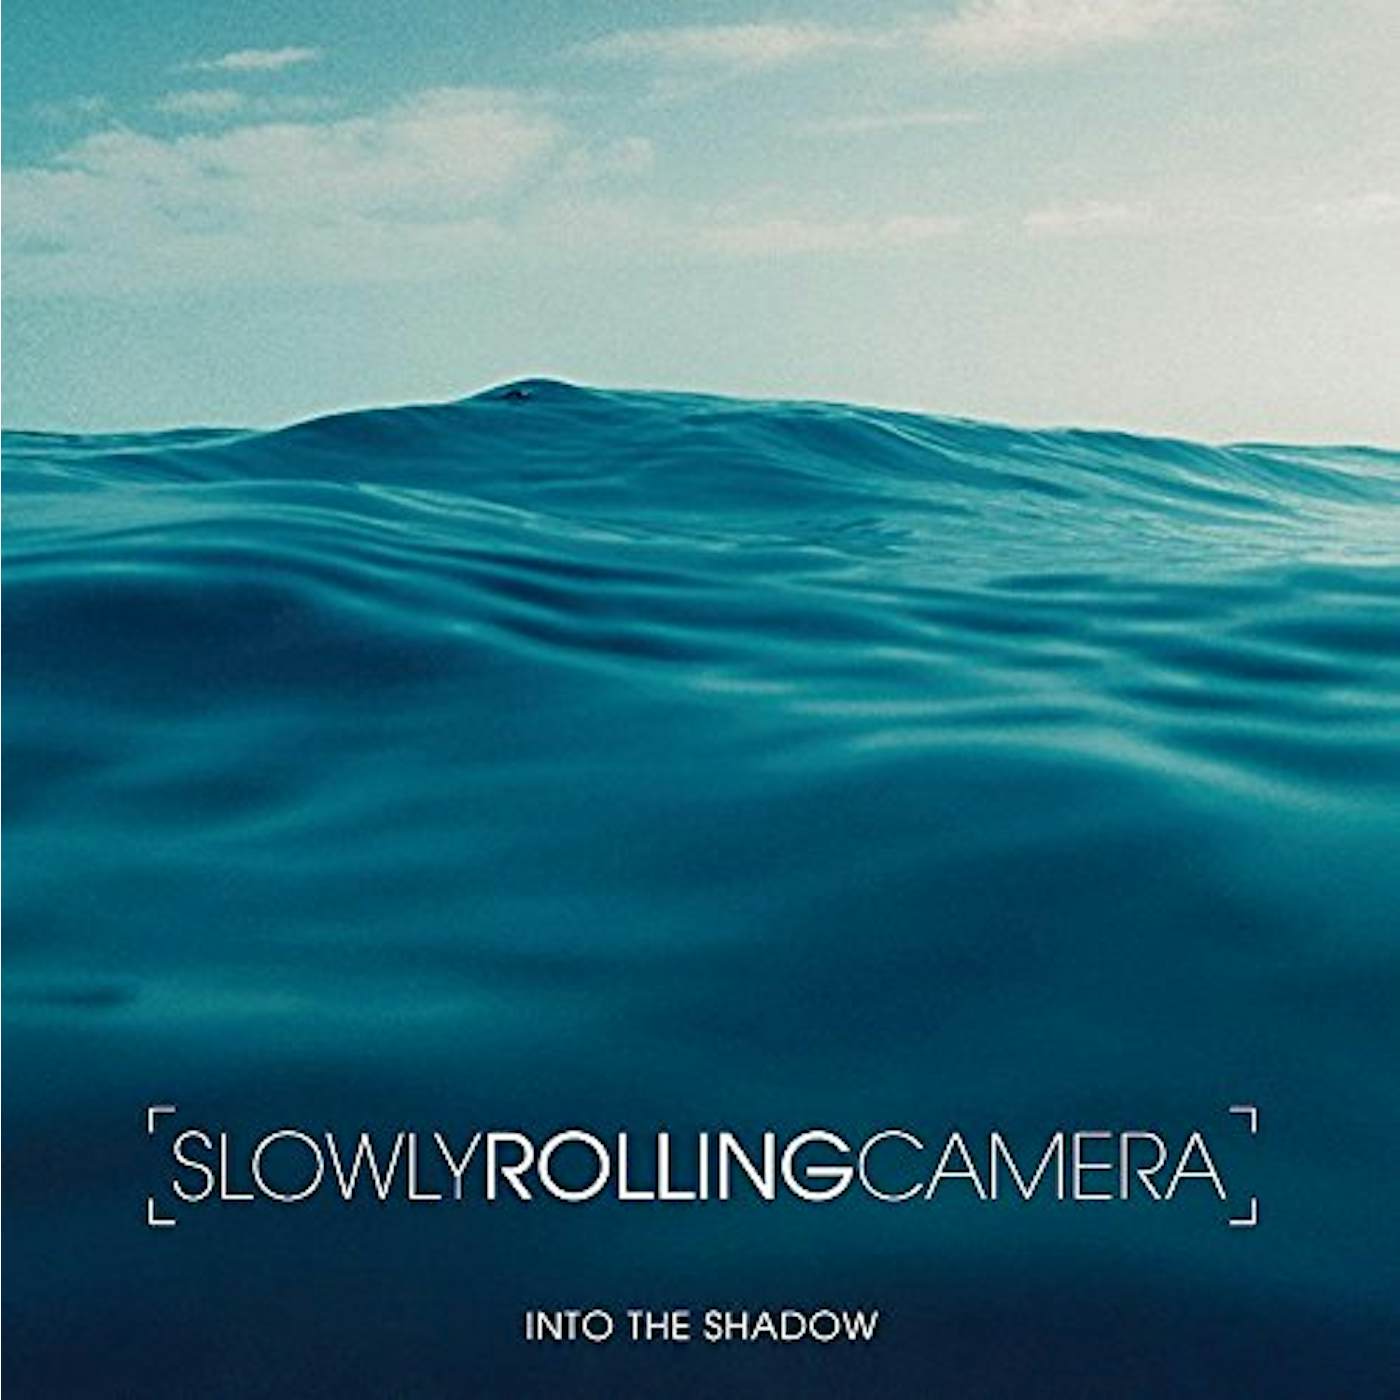 Slowly Rolling Camera INTO THE SHADOW CD